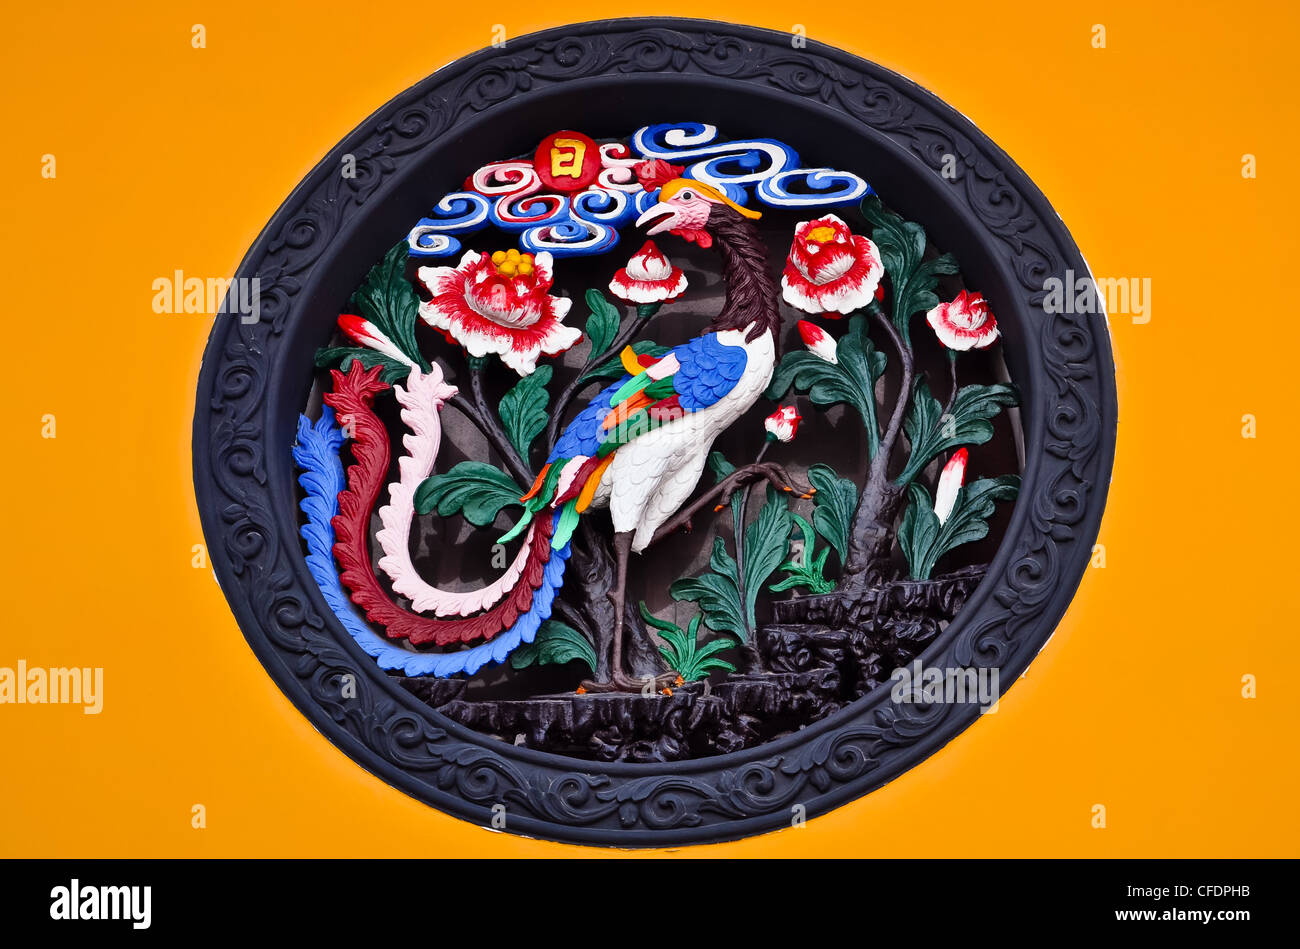 chinese ornament depicting a colorful peacock and flowers Stock Photo